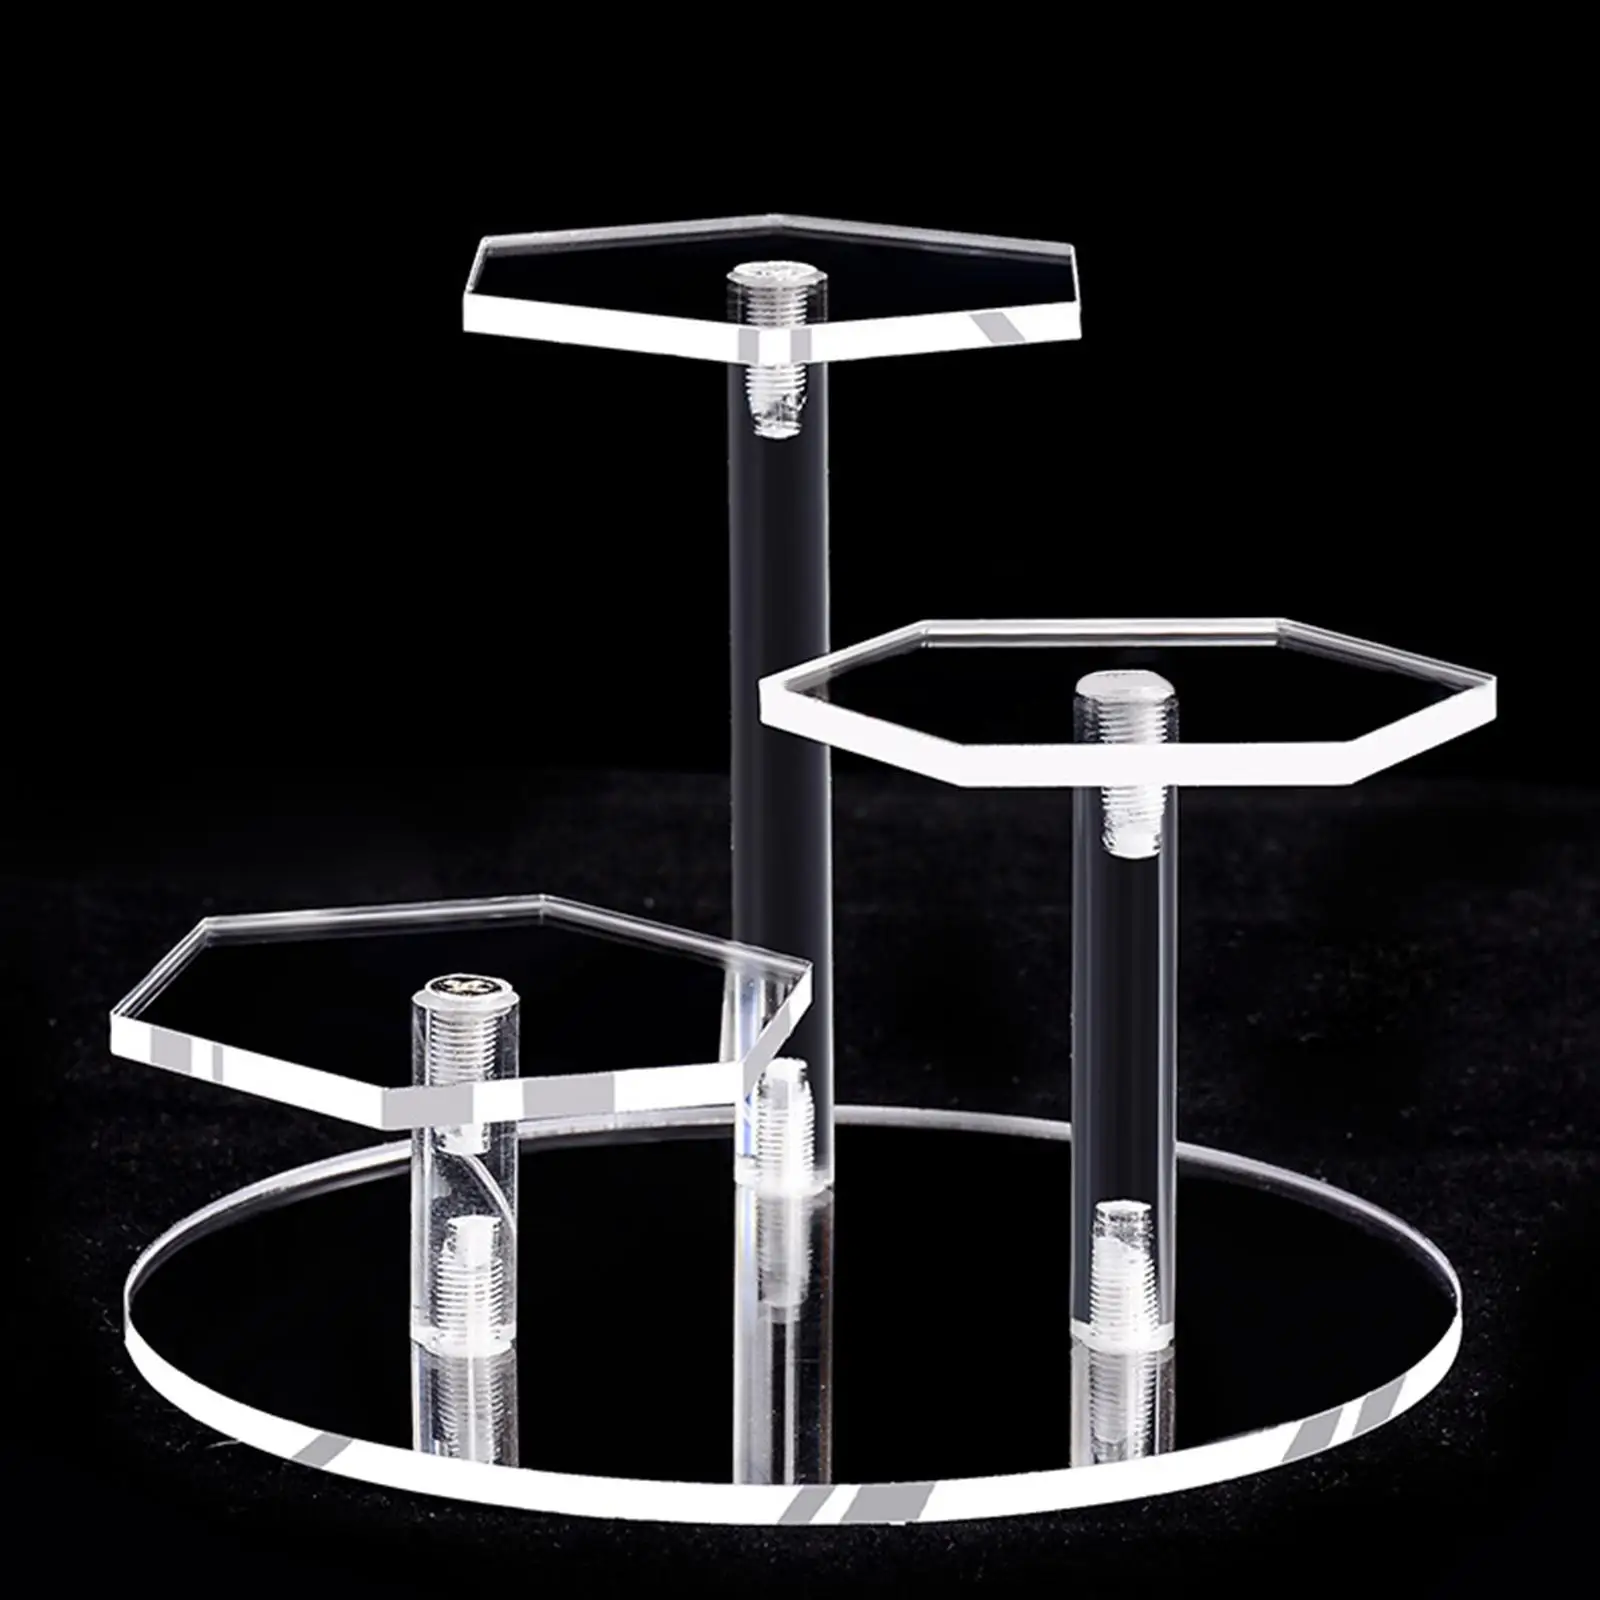 Display Holder Base Sturdy Multilayer Full Display Acrylic Clear Storage Rack for Decoration Home Organizer Collectibles Desktop